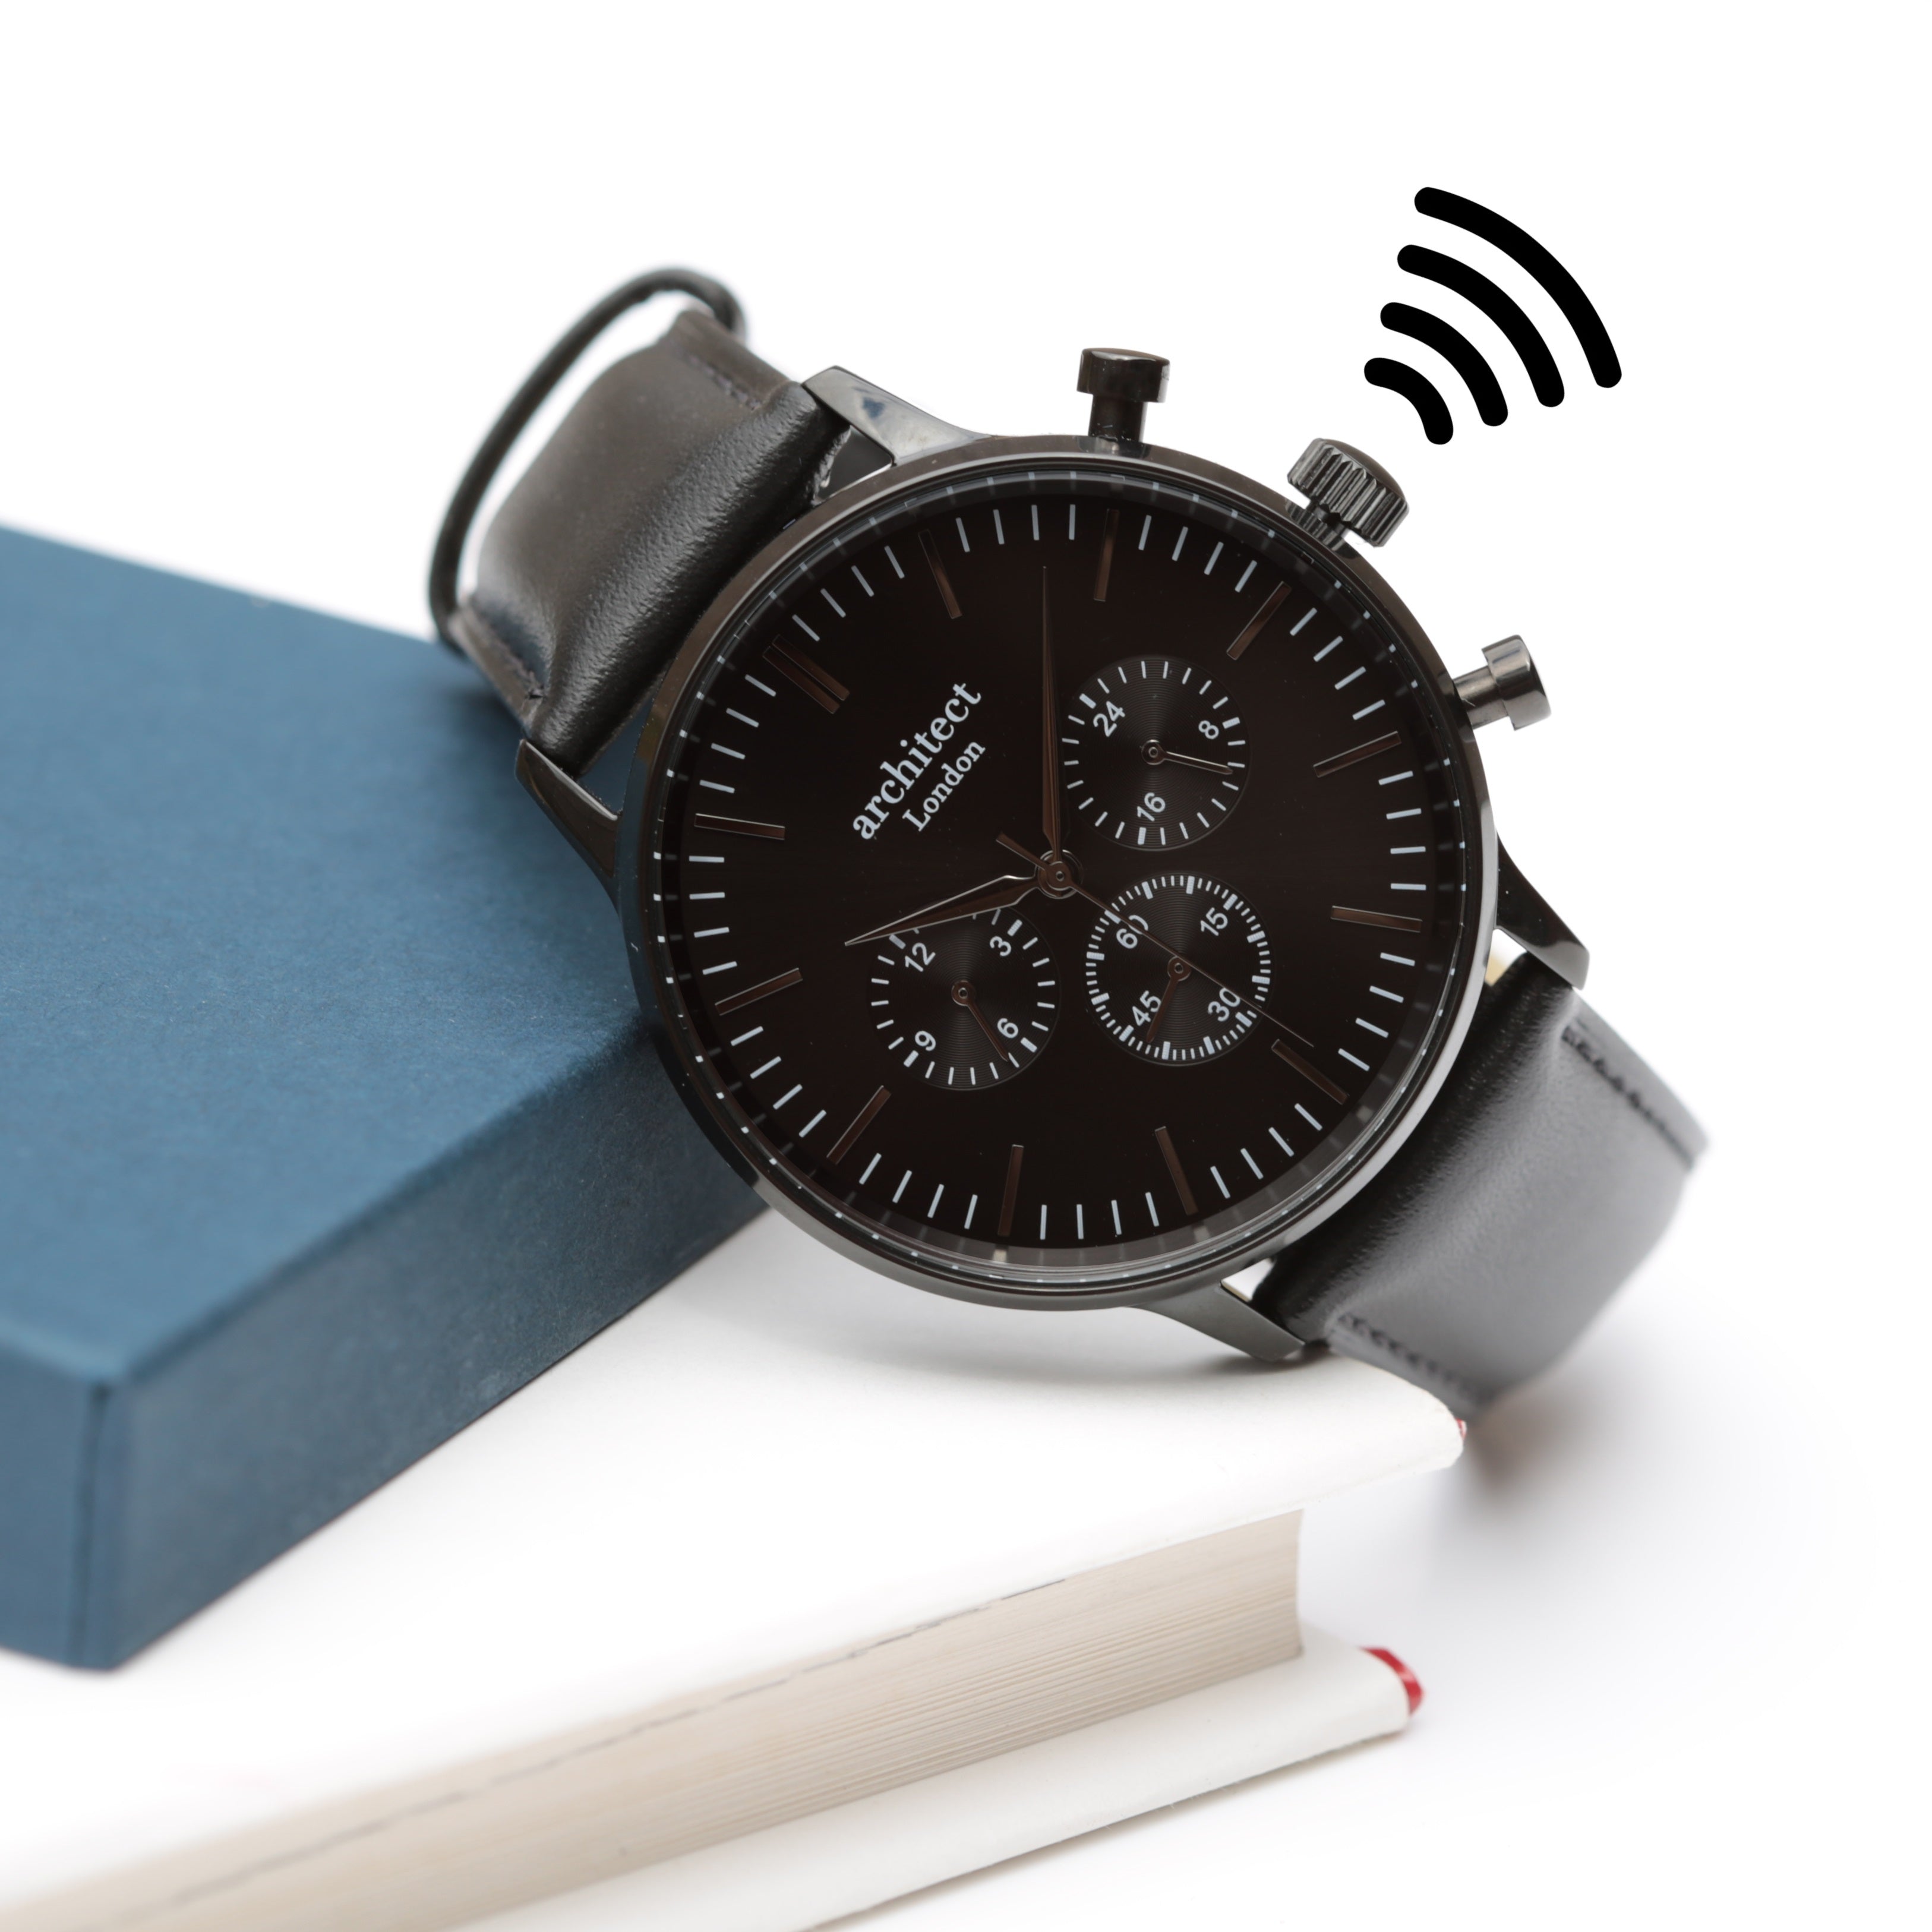 Contactless Payment Watch - Men's Motivator + Jet Black Strap + Own Handwriting Engraving